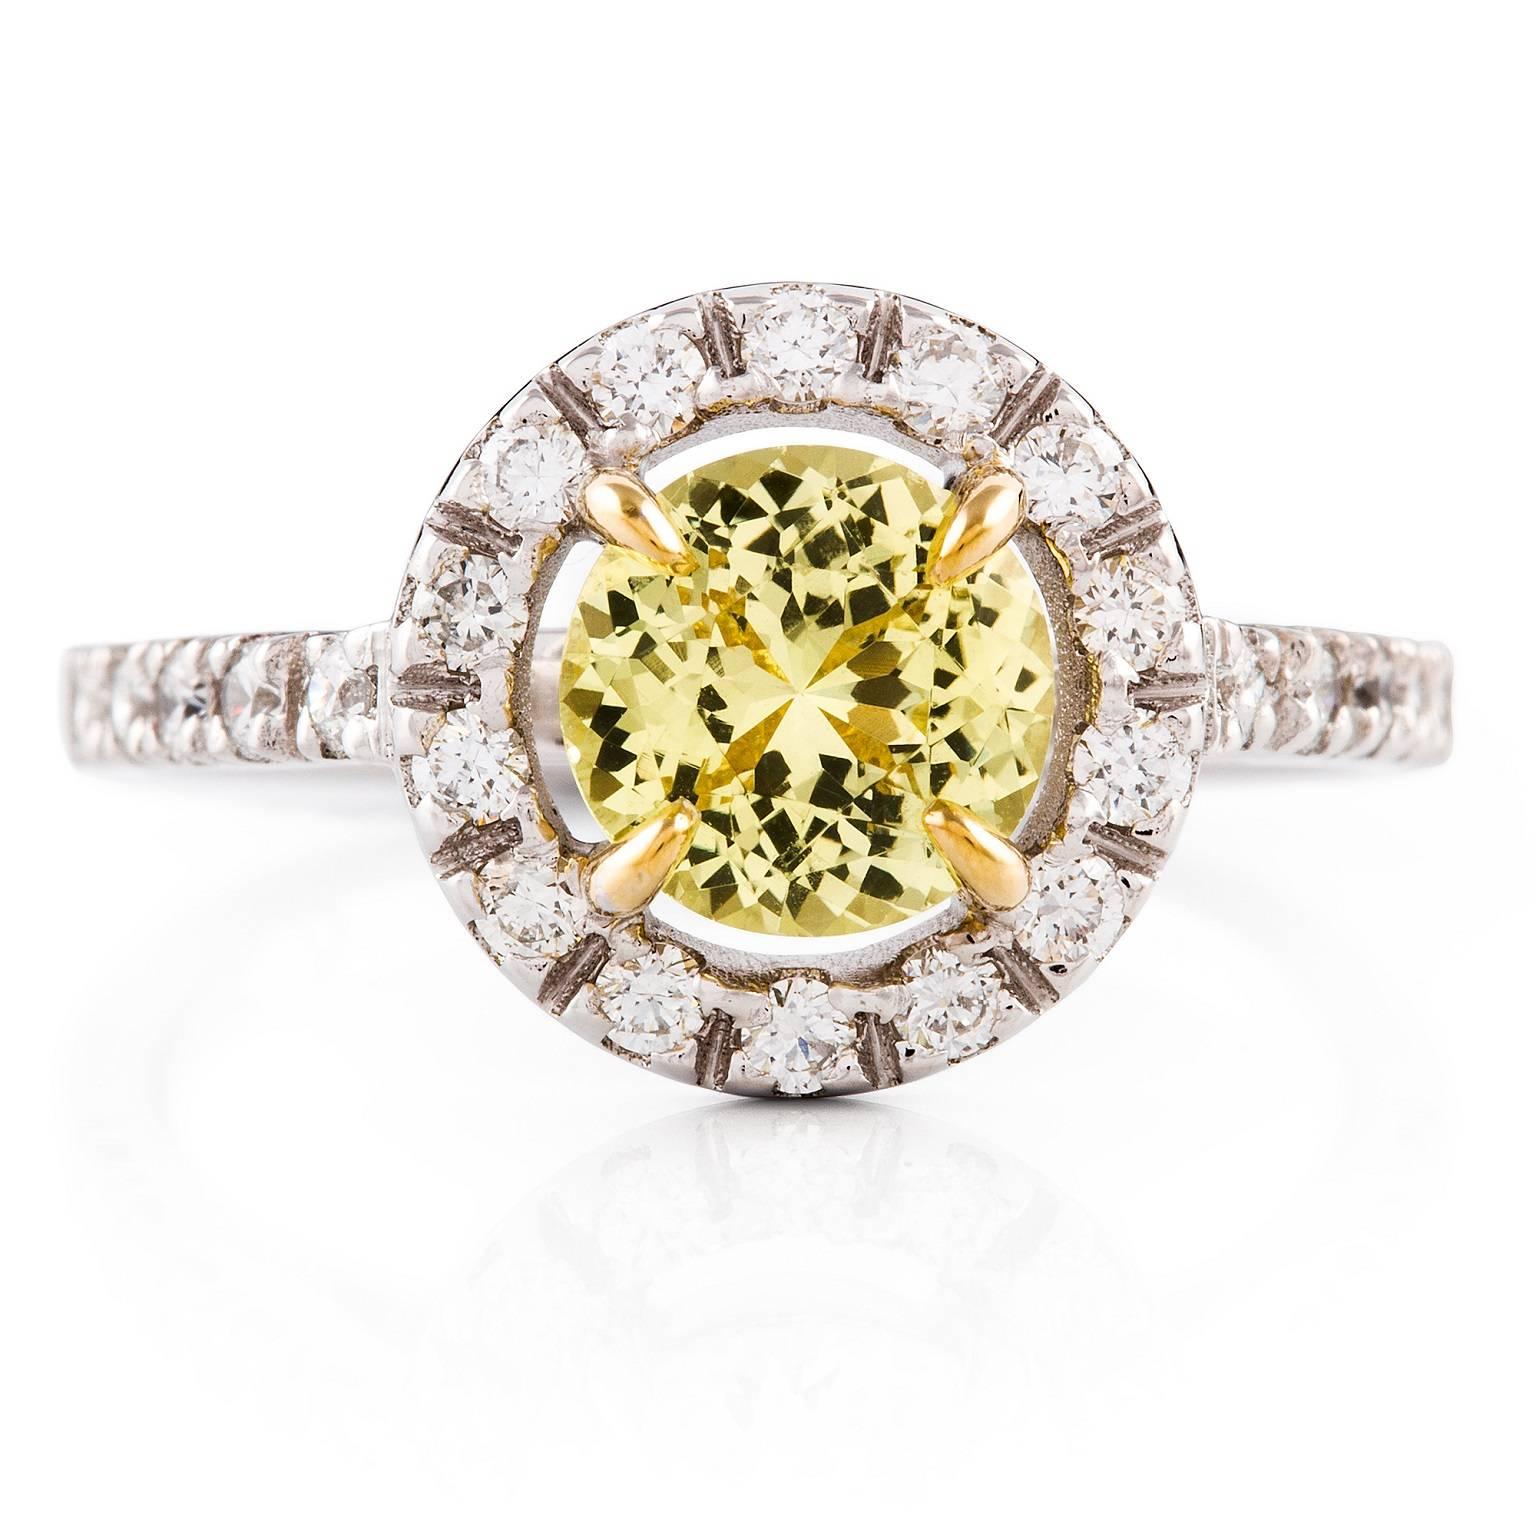 Modern 1.33 Carat Round Yellow Sapphire and Diamond Cluster Ring in 18 Carat Gold